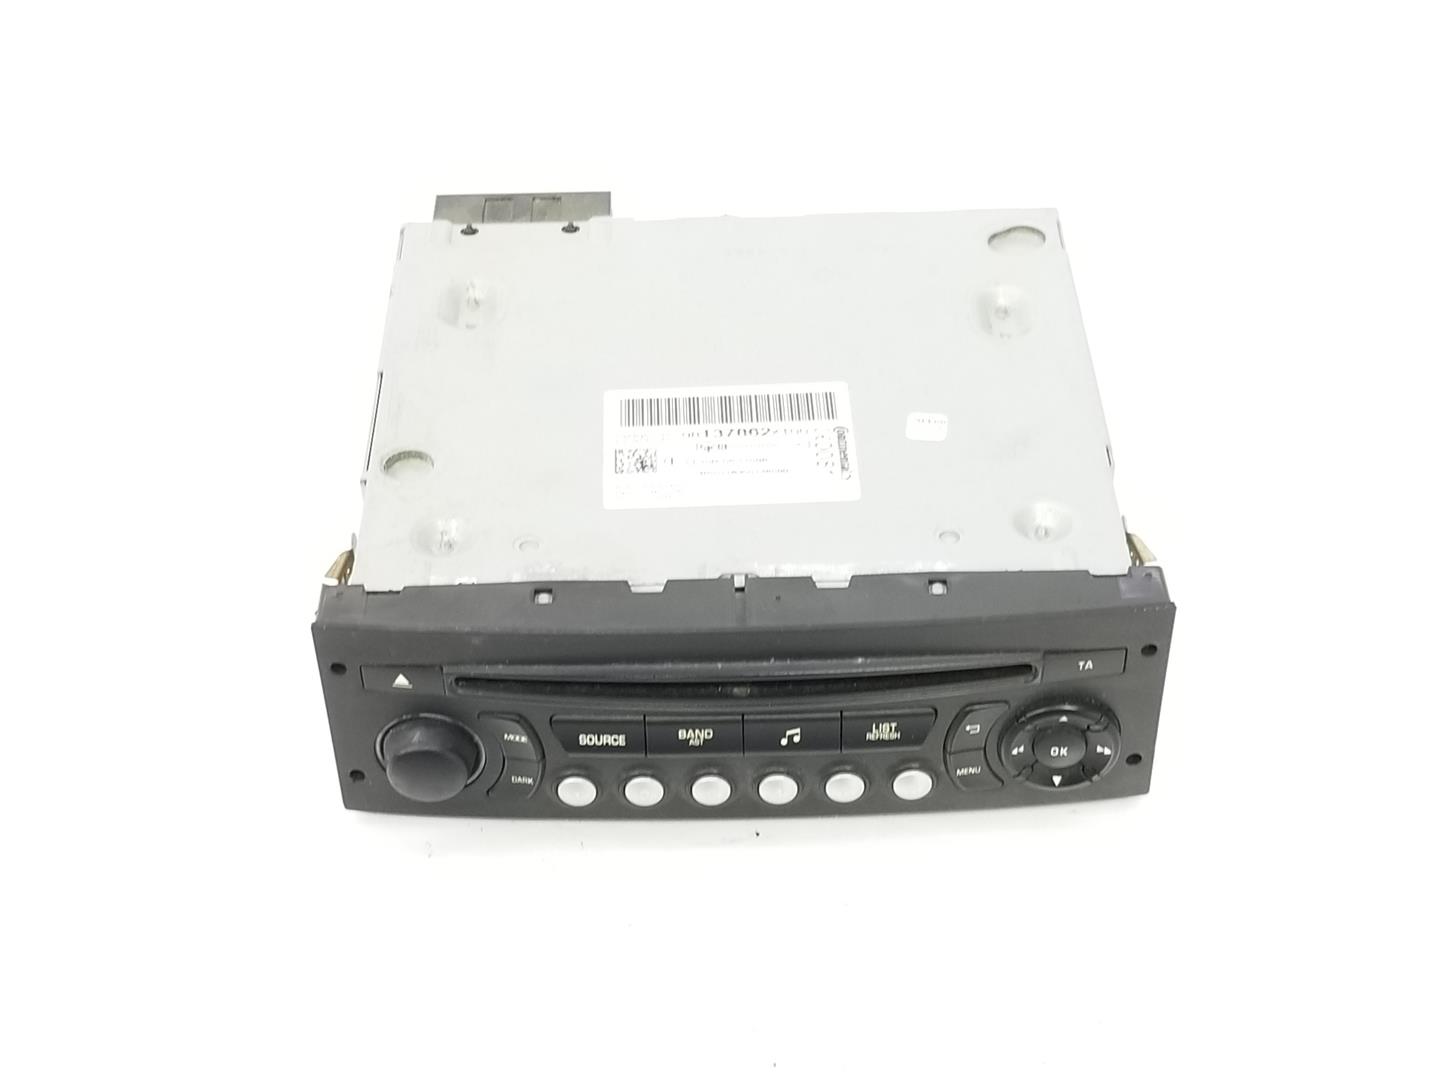 CITROËN C3 Picasso (2009-present) Music Player Without GPS 9812377180,  6300148099 19780920 - Used parts online - 7406541